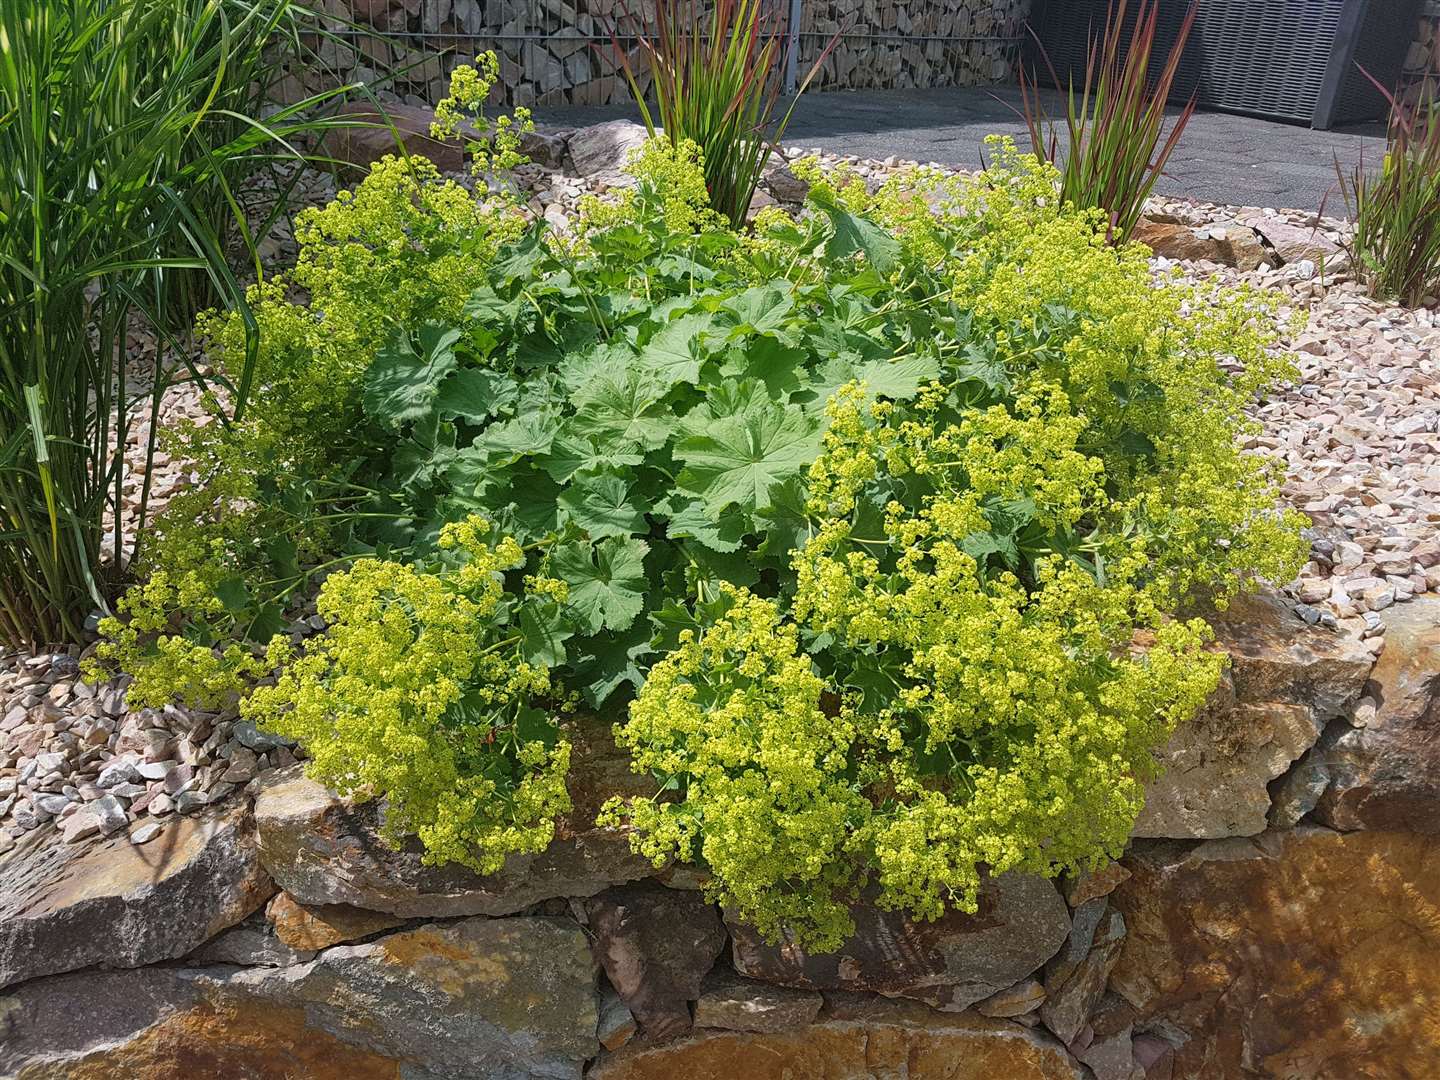 Good infill plants at the lowest level towards the front of the border include alchemilla. Picture: iStock/PA